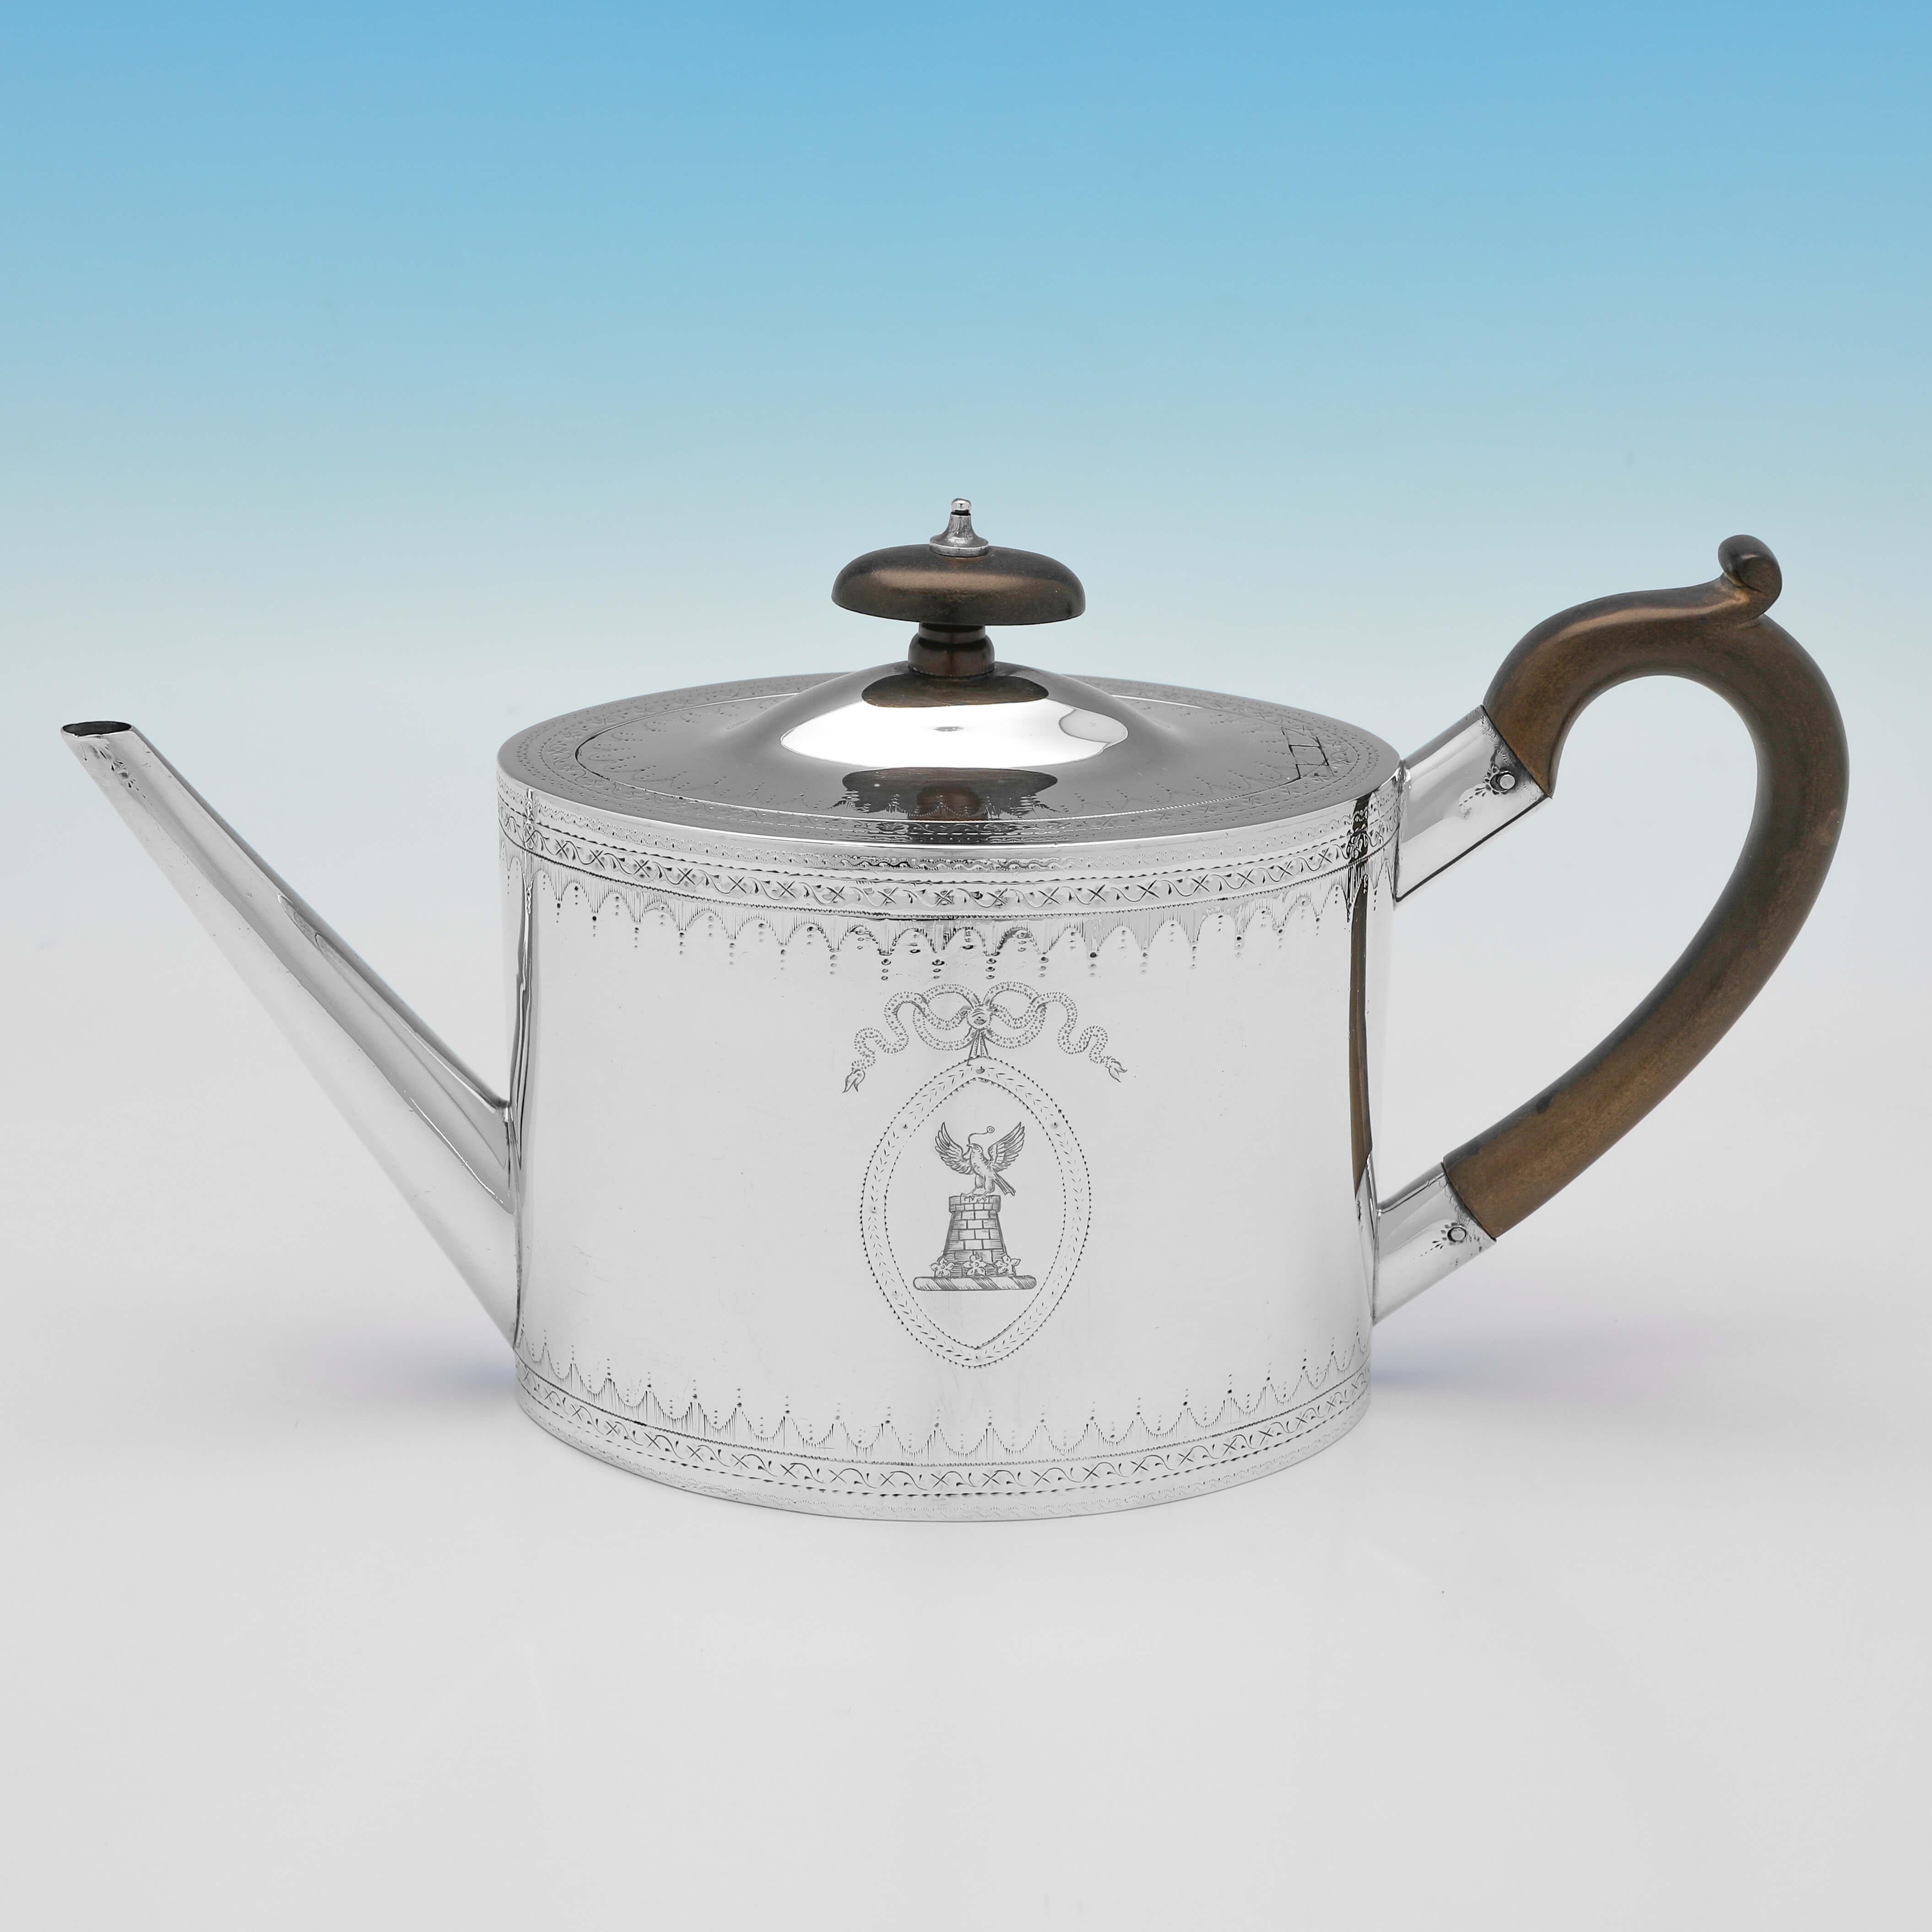 Neoclassical 18th Century Sterling Silver Teapot On Stand - John Denziloe 1787/8 In Good Condition For Sale In London, London